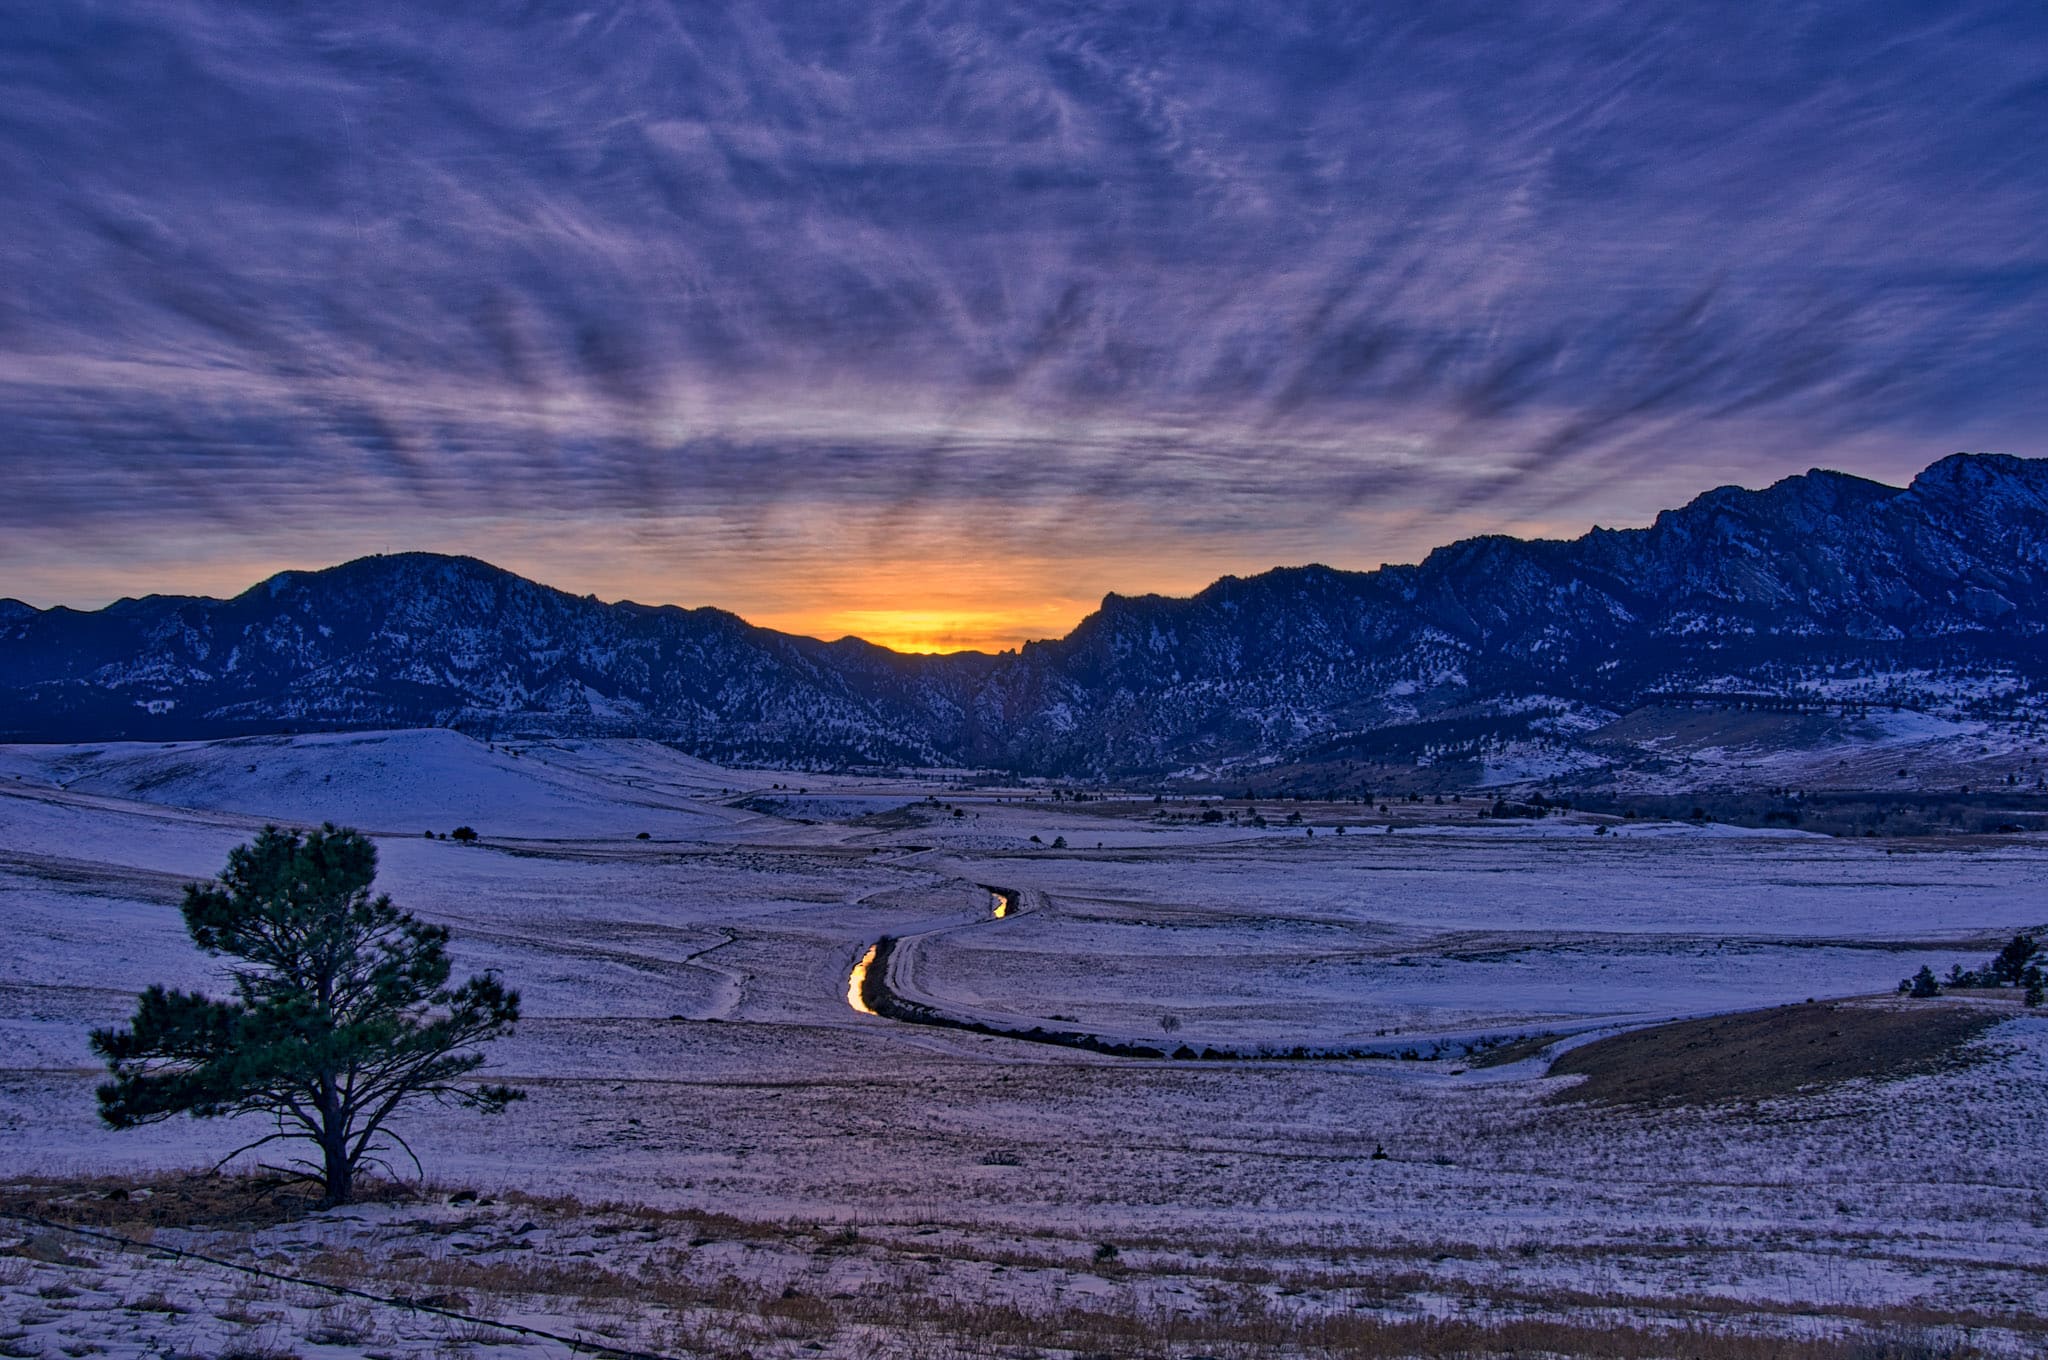 Setting sun with crepuscular rays over Eldorado Canyon in the Front Range of the Rocky Mountains near Boulder, Colorado.